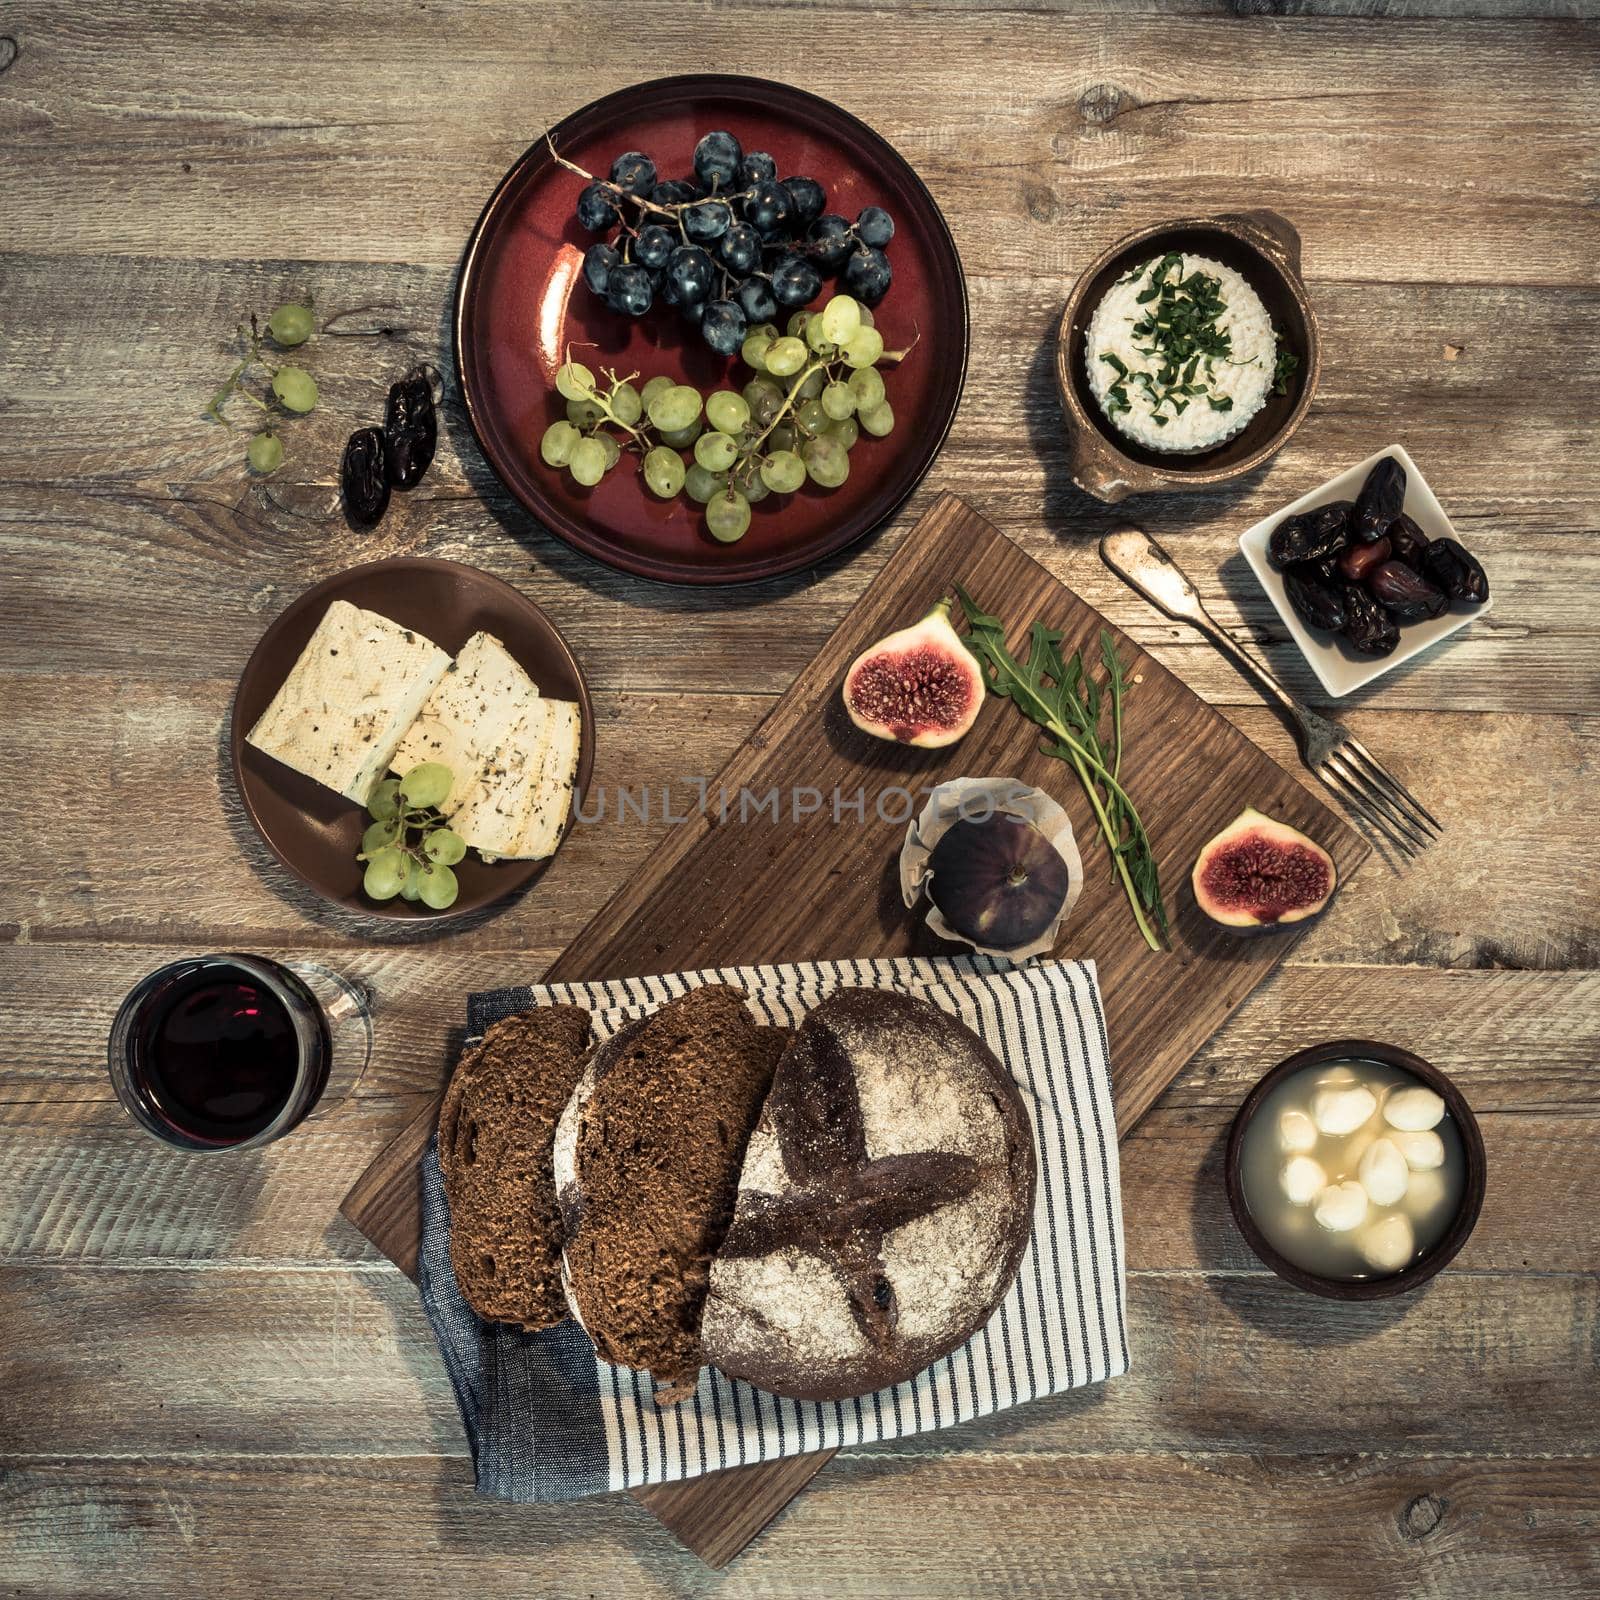 bread with cheeses and grapes on wooden background by tan4ikk1